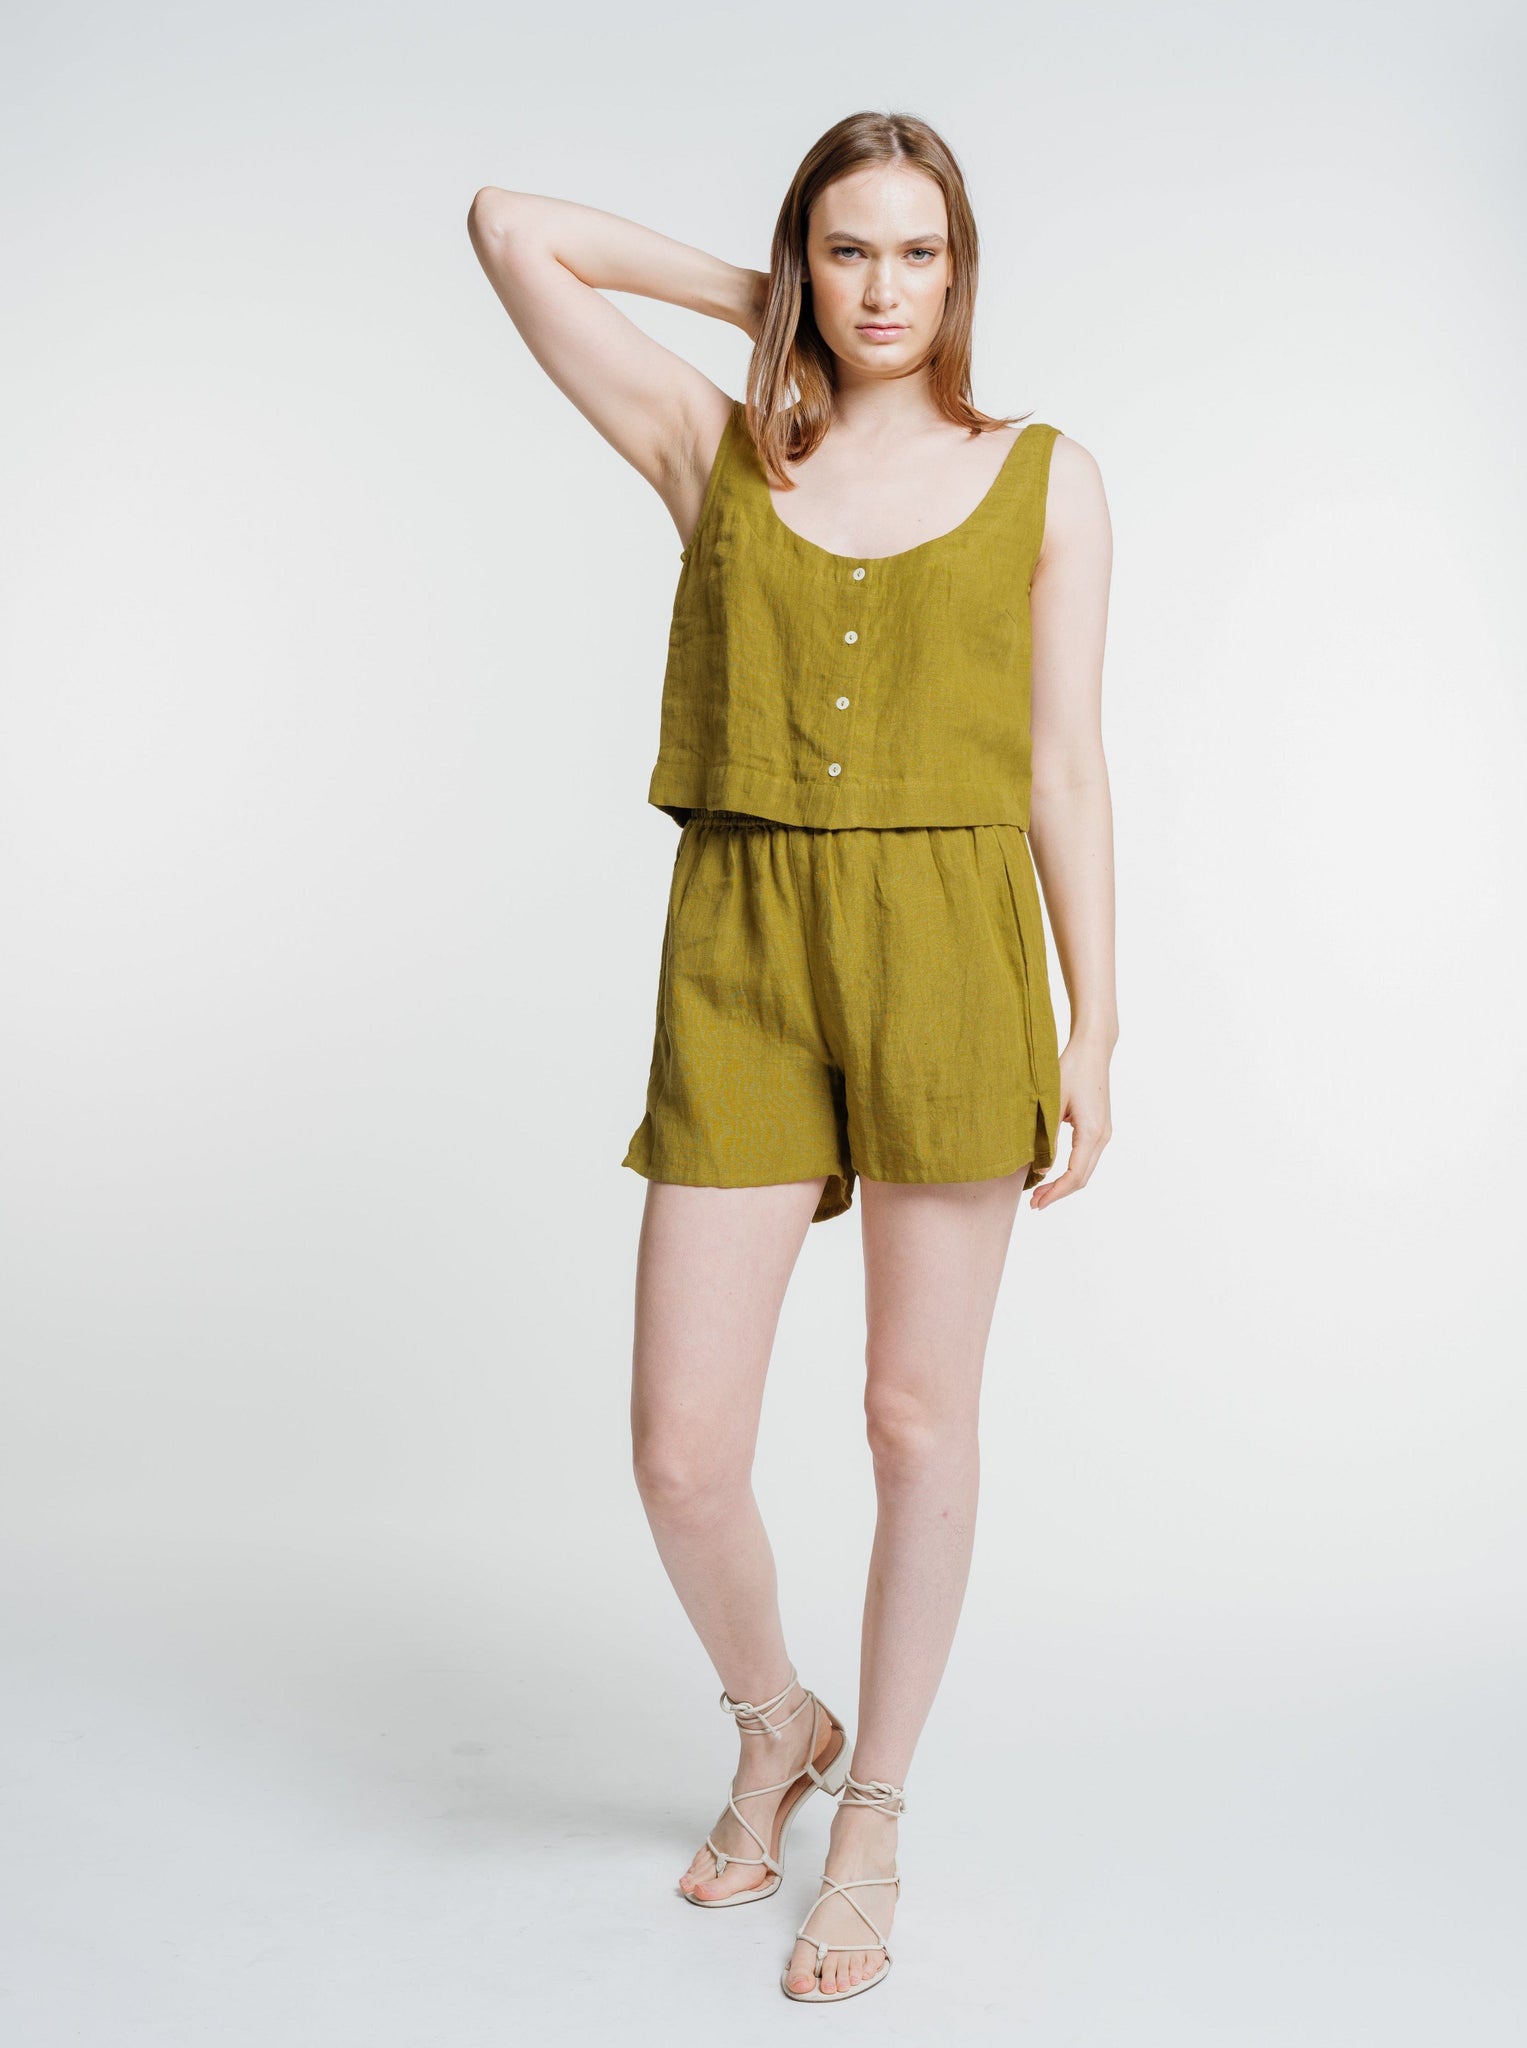 The model is wearing Everyday Short - Dried Tobacco.